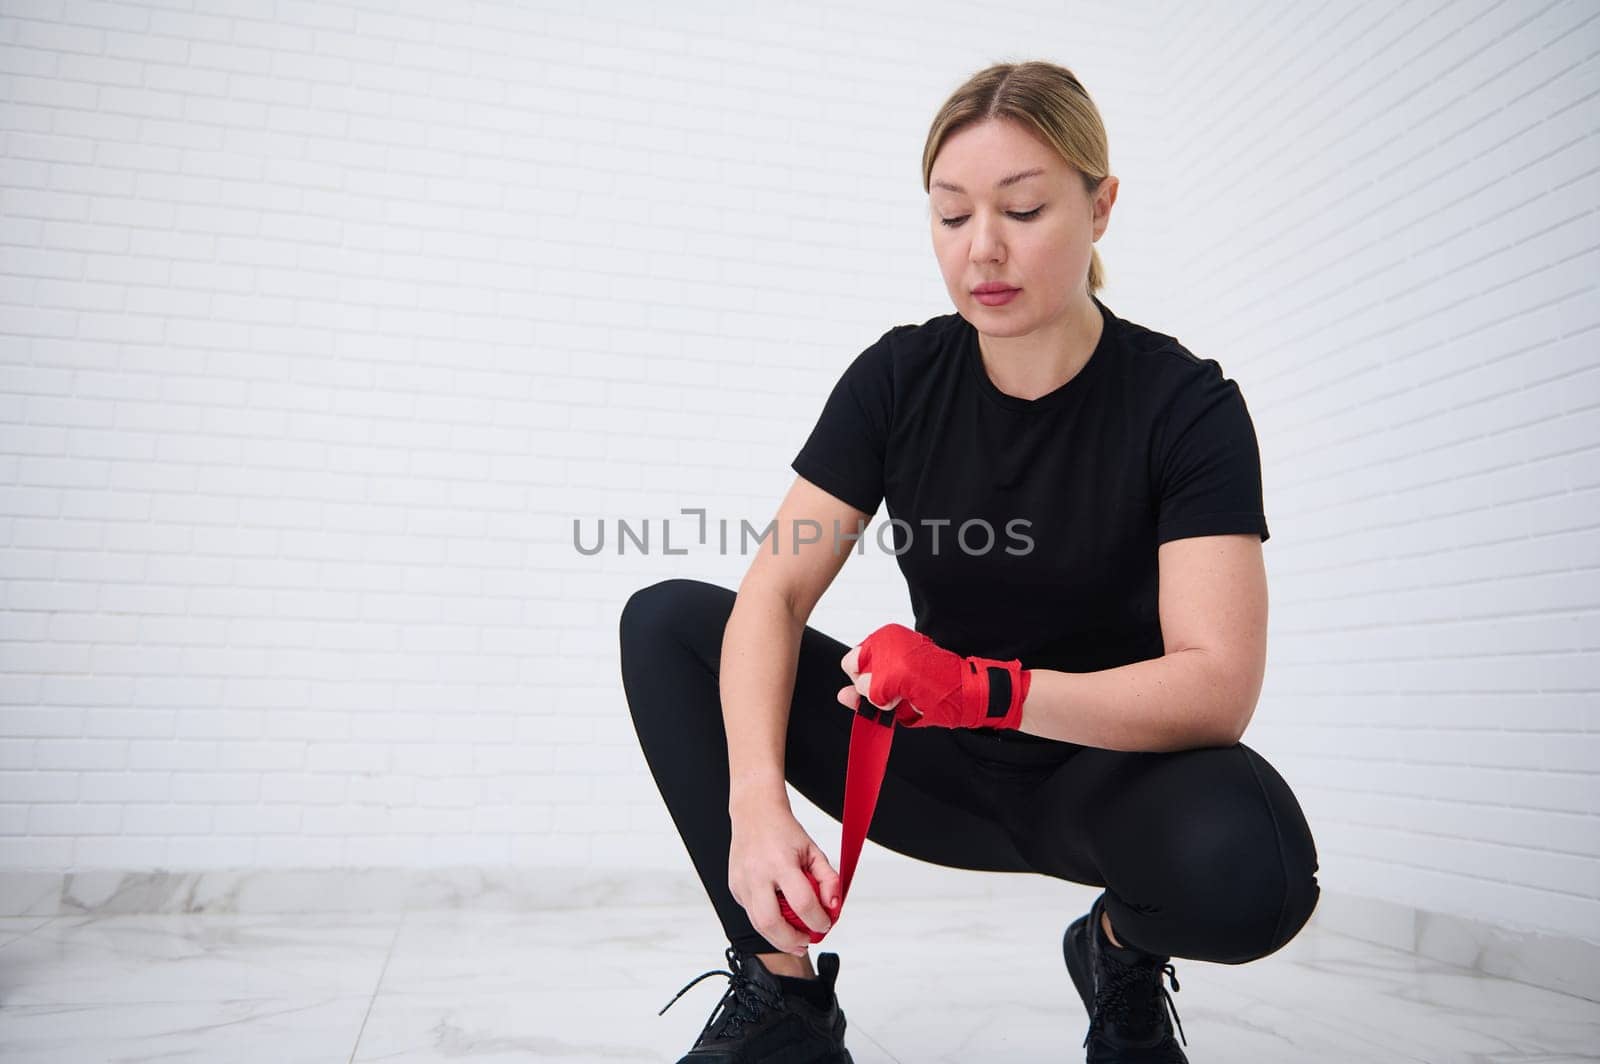 Caucasian young woman boxer fighter preparing boxing bandages, wrapping her wrist and hands with a red tape, before putting on boxing gloves, getting ready for training, isolated over white background